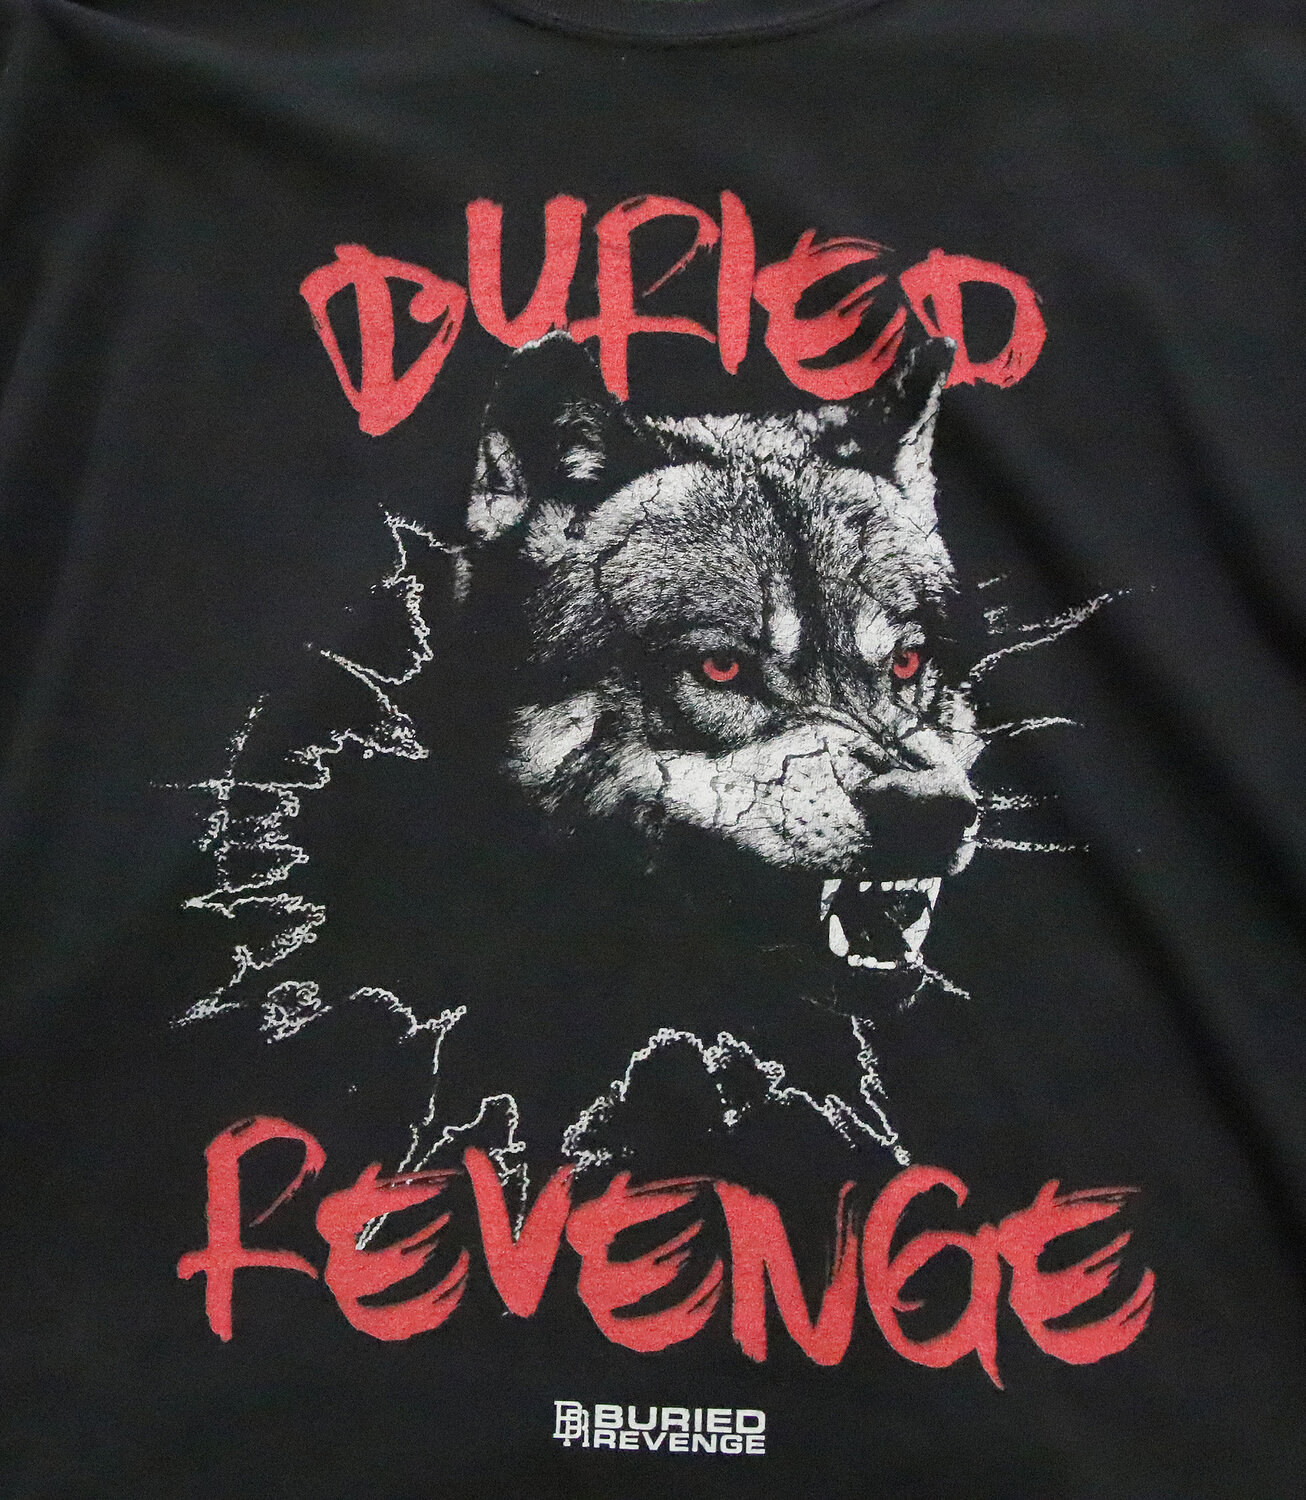 This is one of the logos that appears on Reynolds' clothing line Buried Revenge.